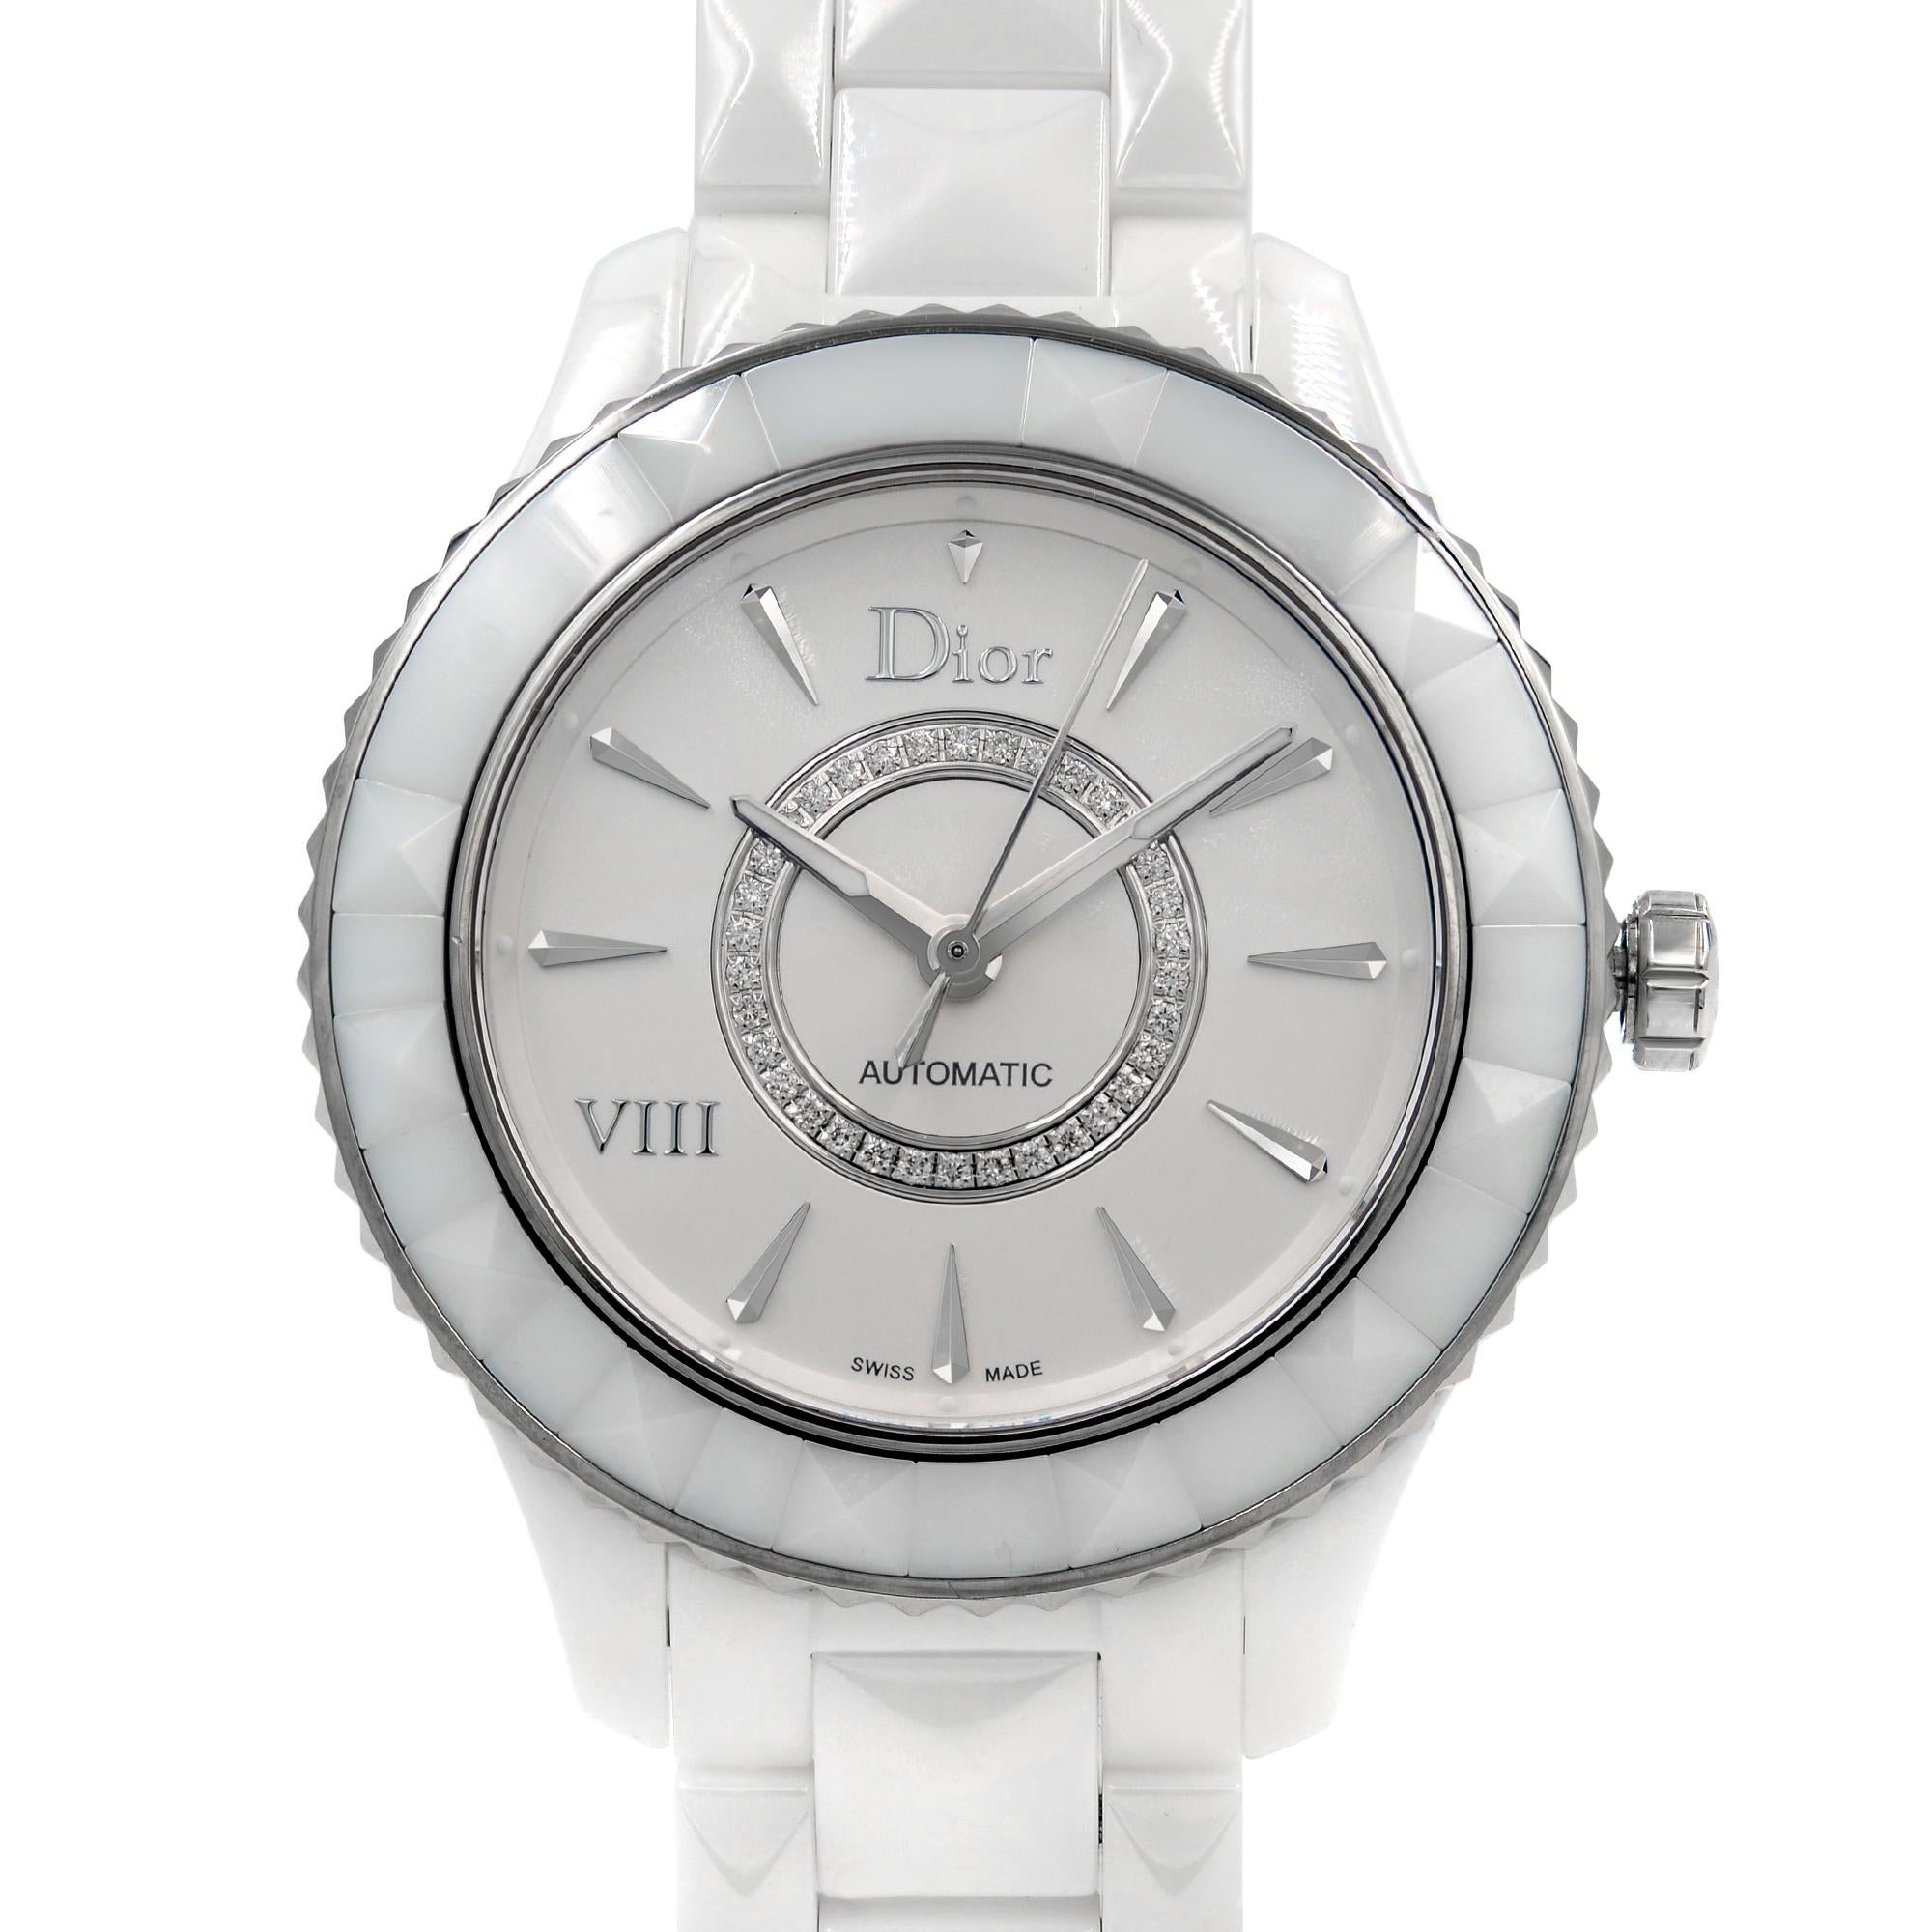 Pre-owned. The band of this watch has a chipped link by '12 o'clock lugs. Comes with a Chronostore Presentation Box and Authenticity Card. Covered by 1-year Chronostore Warranty.

Details:
MSRP 7600
Brand Dior
Department Women
Model Number